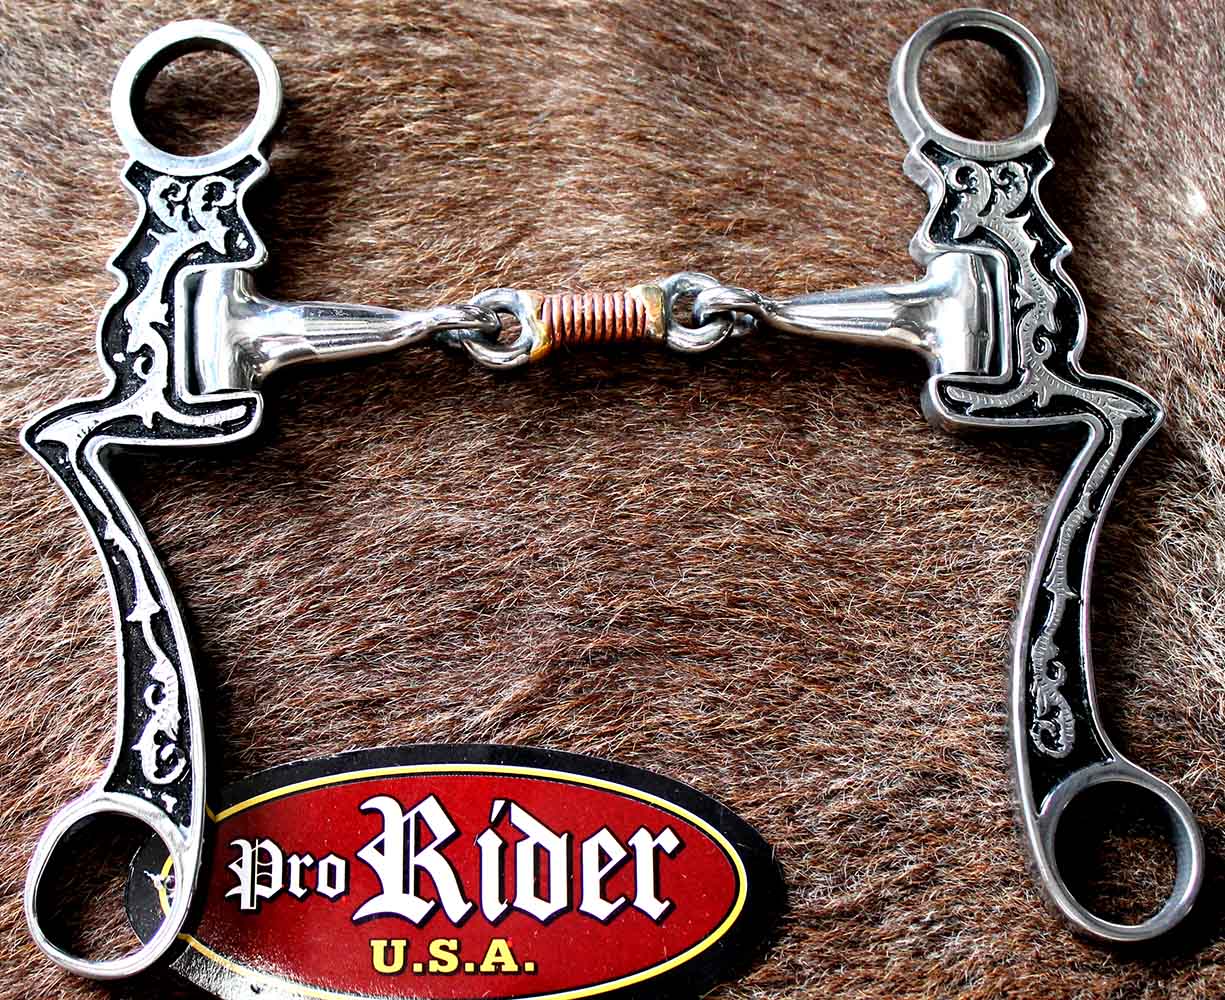 CHALLENGER Horse Western 5 Dog Bone Mouth Copper Inlay Engraved Argentine Snaffle Bit 3502